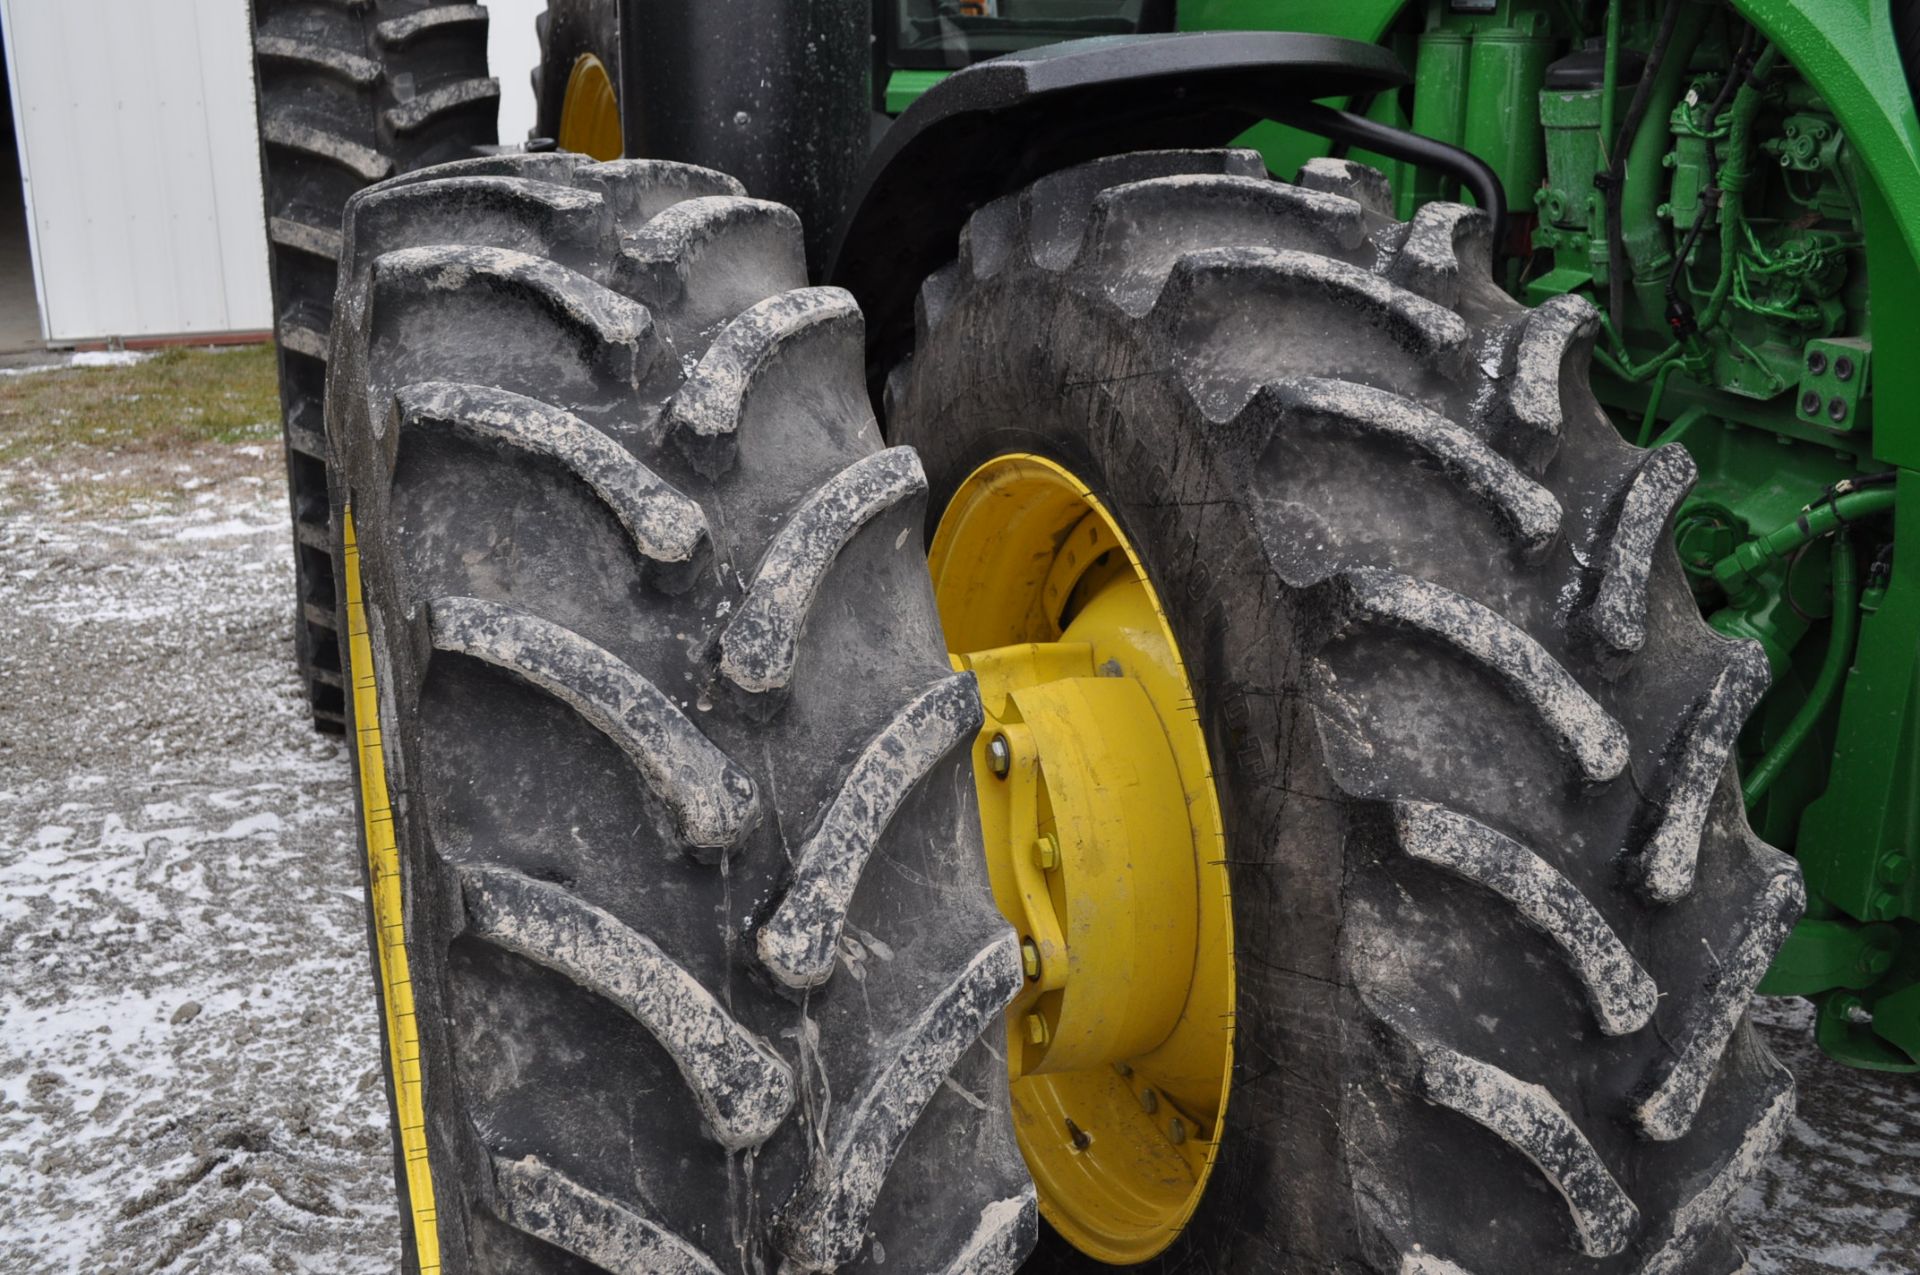 John Deere 8360R MFWD tractor, 480/80R50 rear duals, 420/85 R34 front duals, IVT, ILS, active - Image 8 of 40